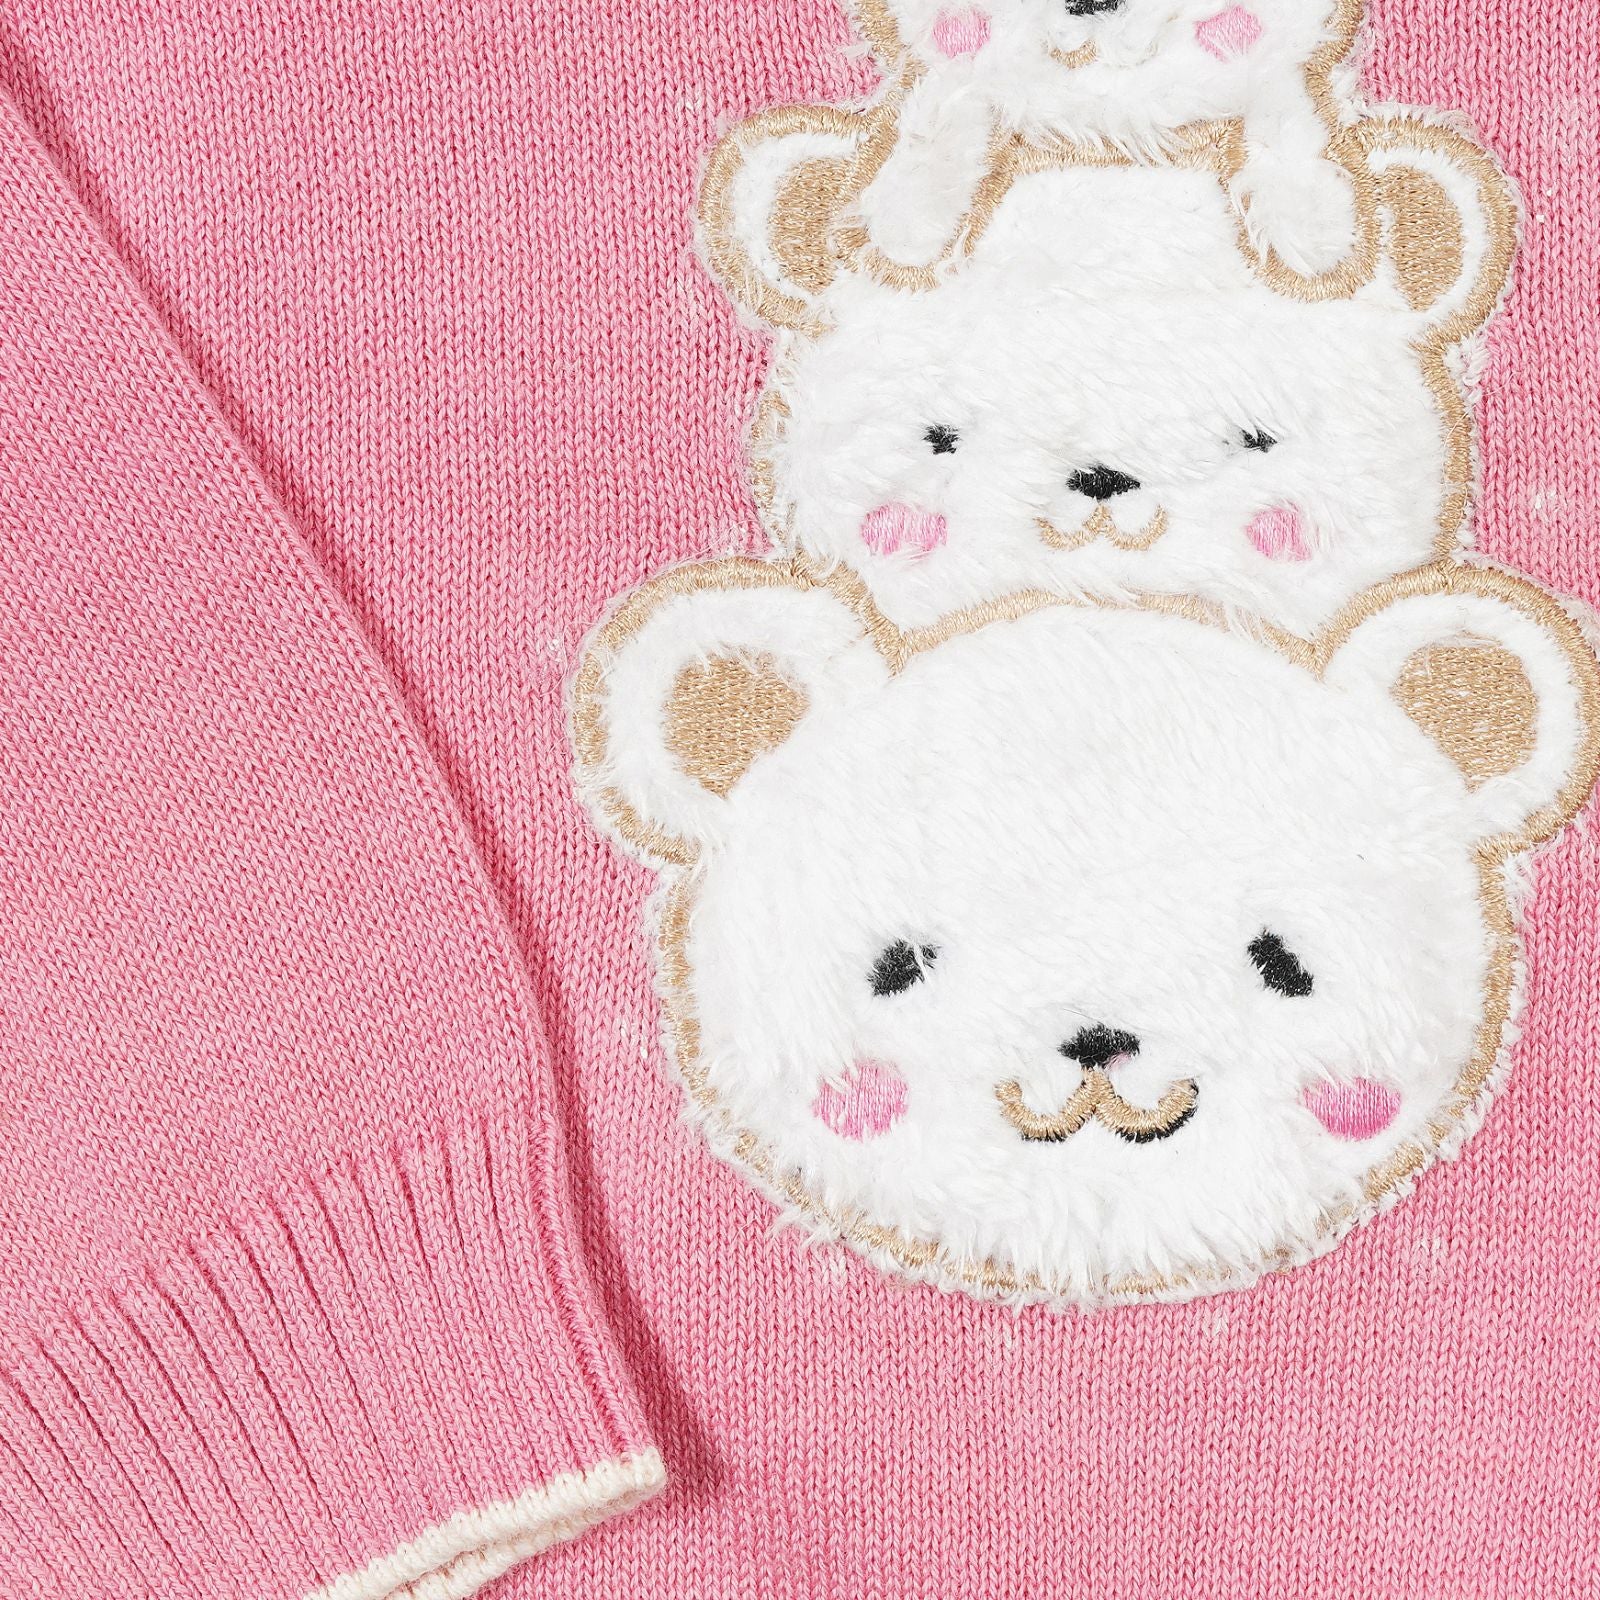 Adorable Bear Family and Wisker Jacquard Sweater Set of 3 - Pink